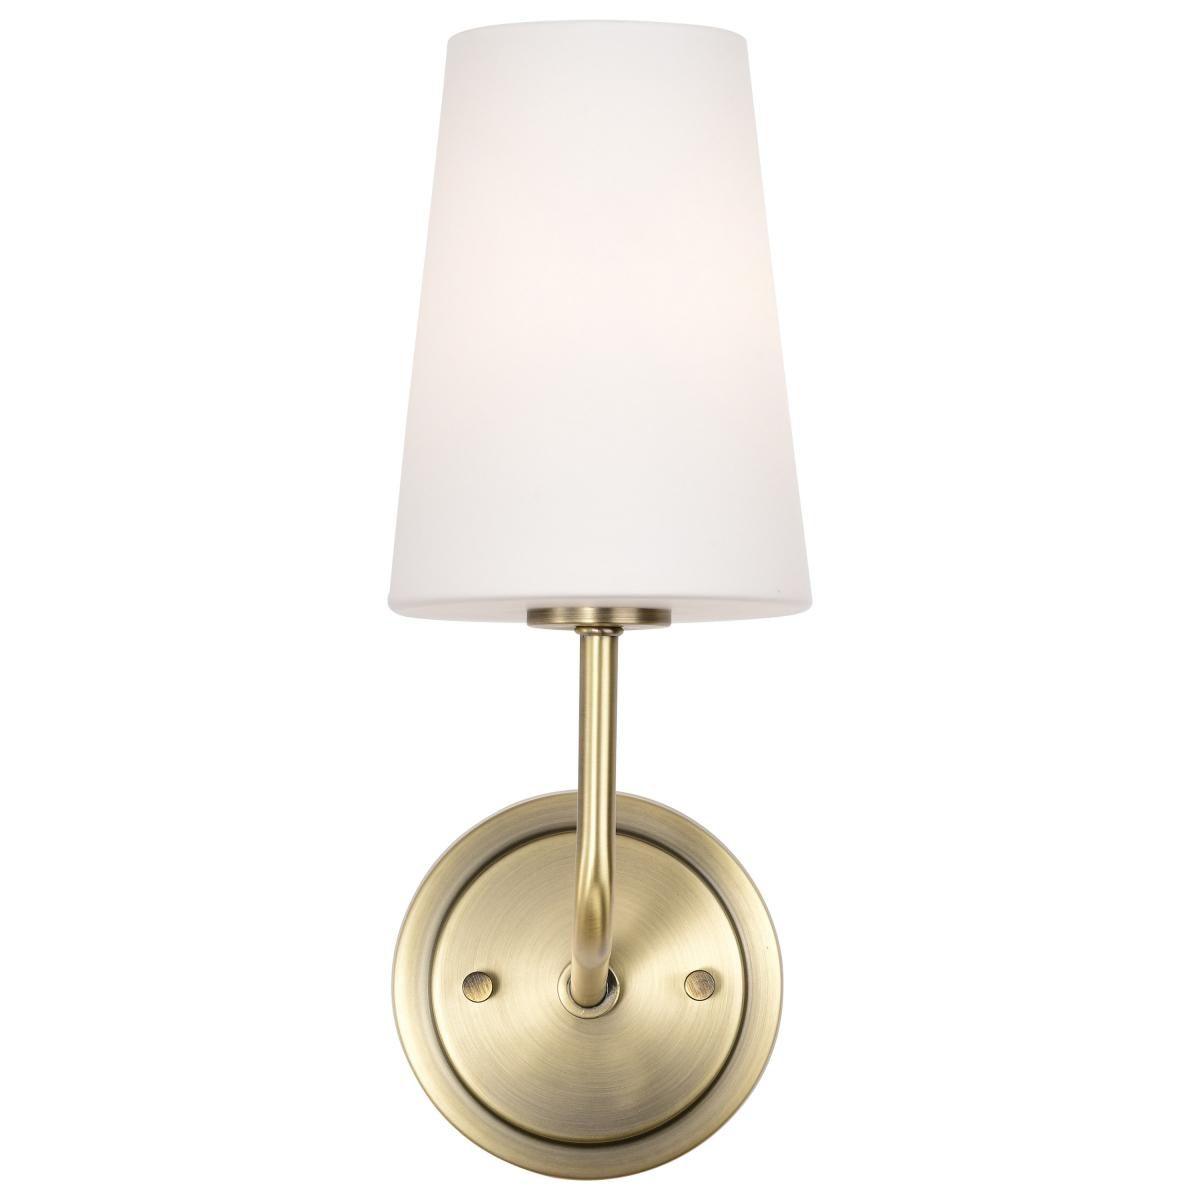 Cordello 15 in. Wall Sconce Vintage Brass Finish